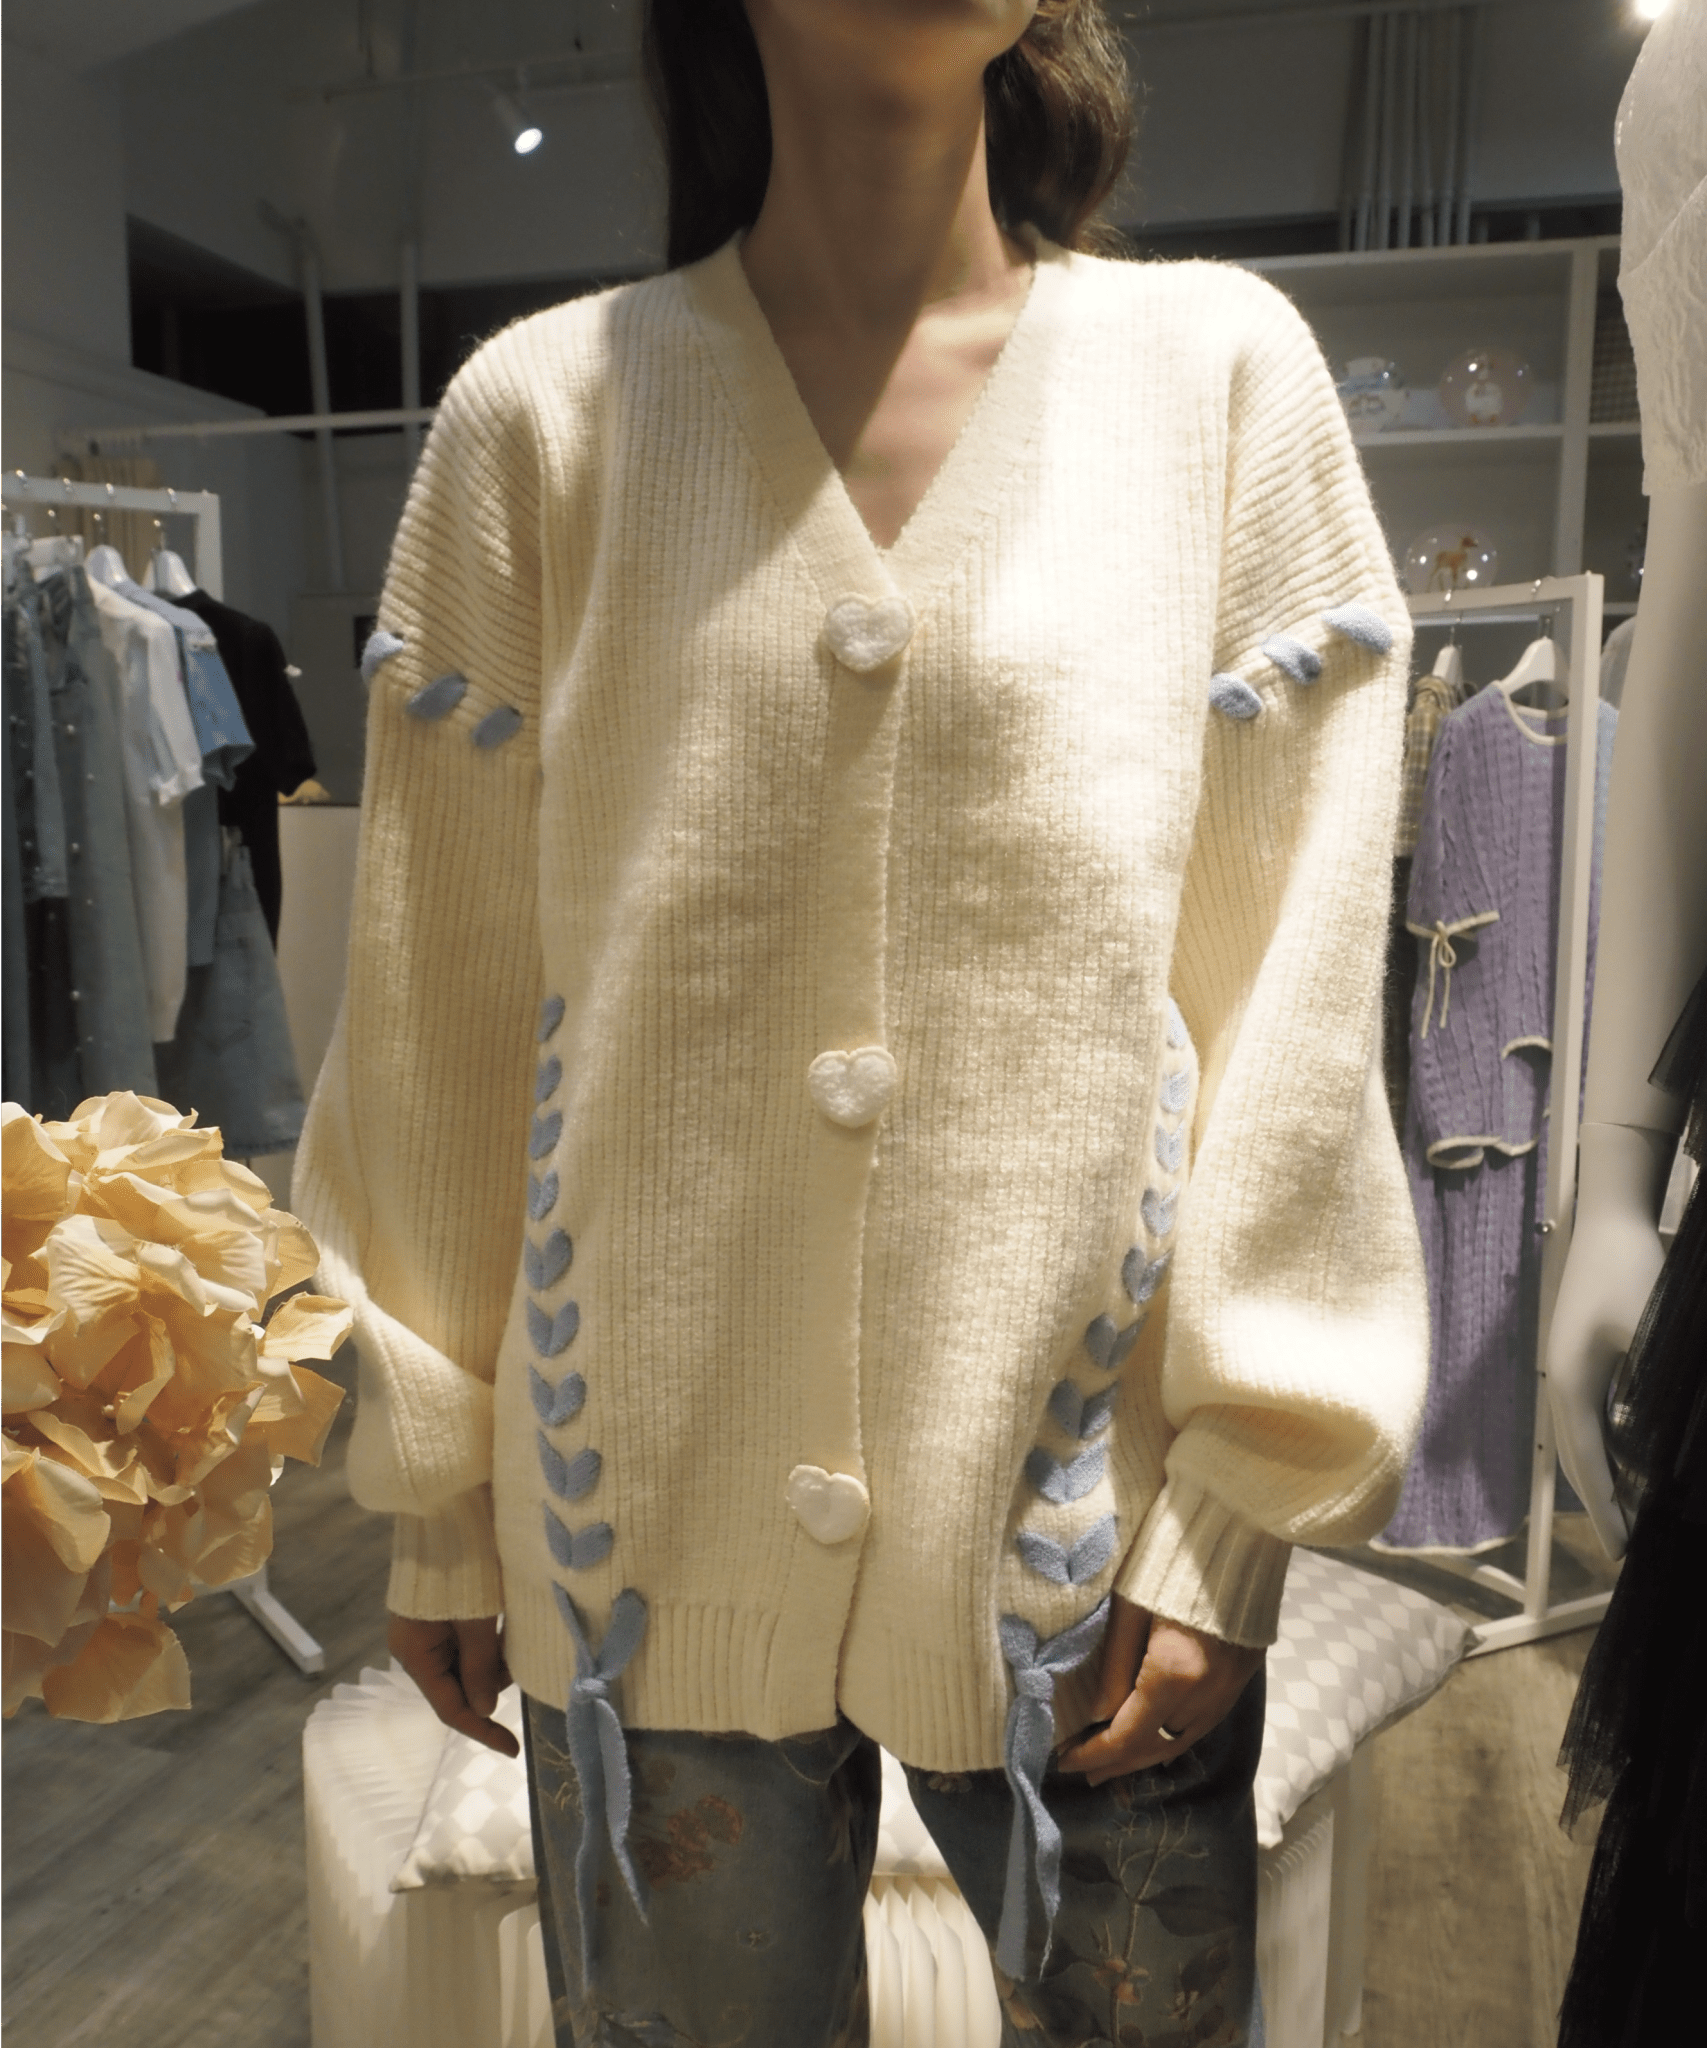 Lace Up Cardigan レースアップカーディガン - LOVE POMME POMME